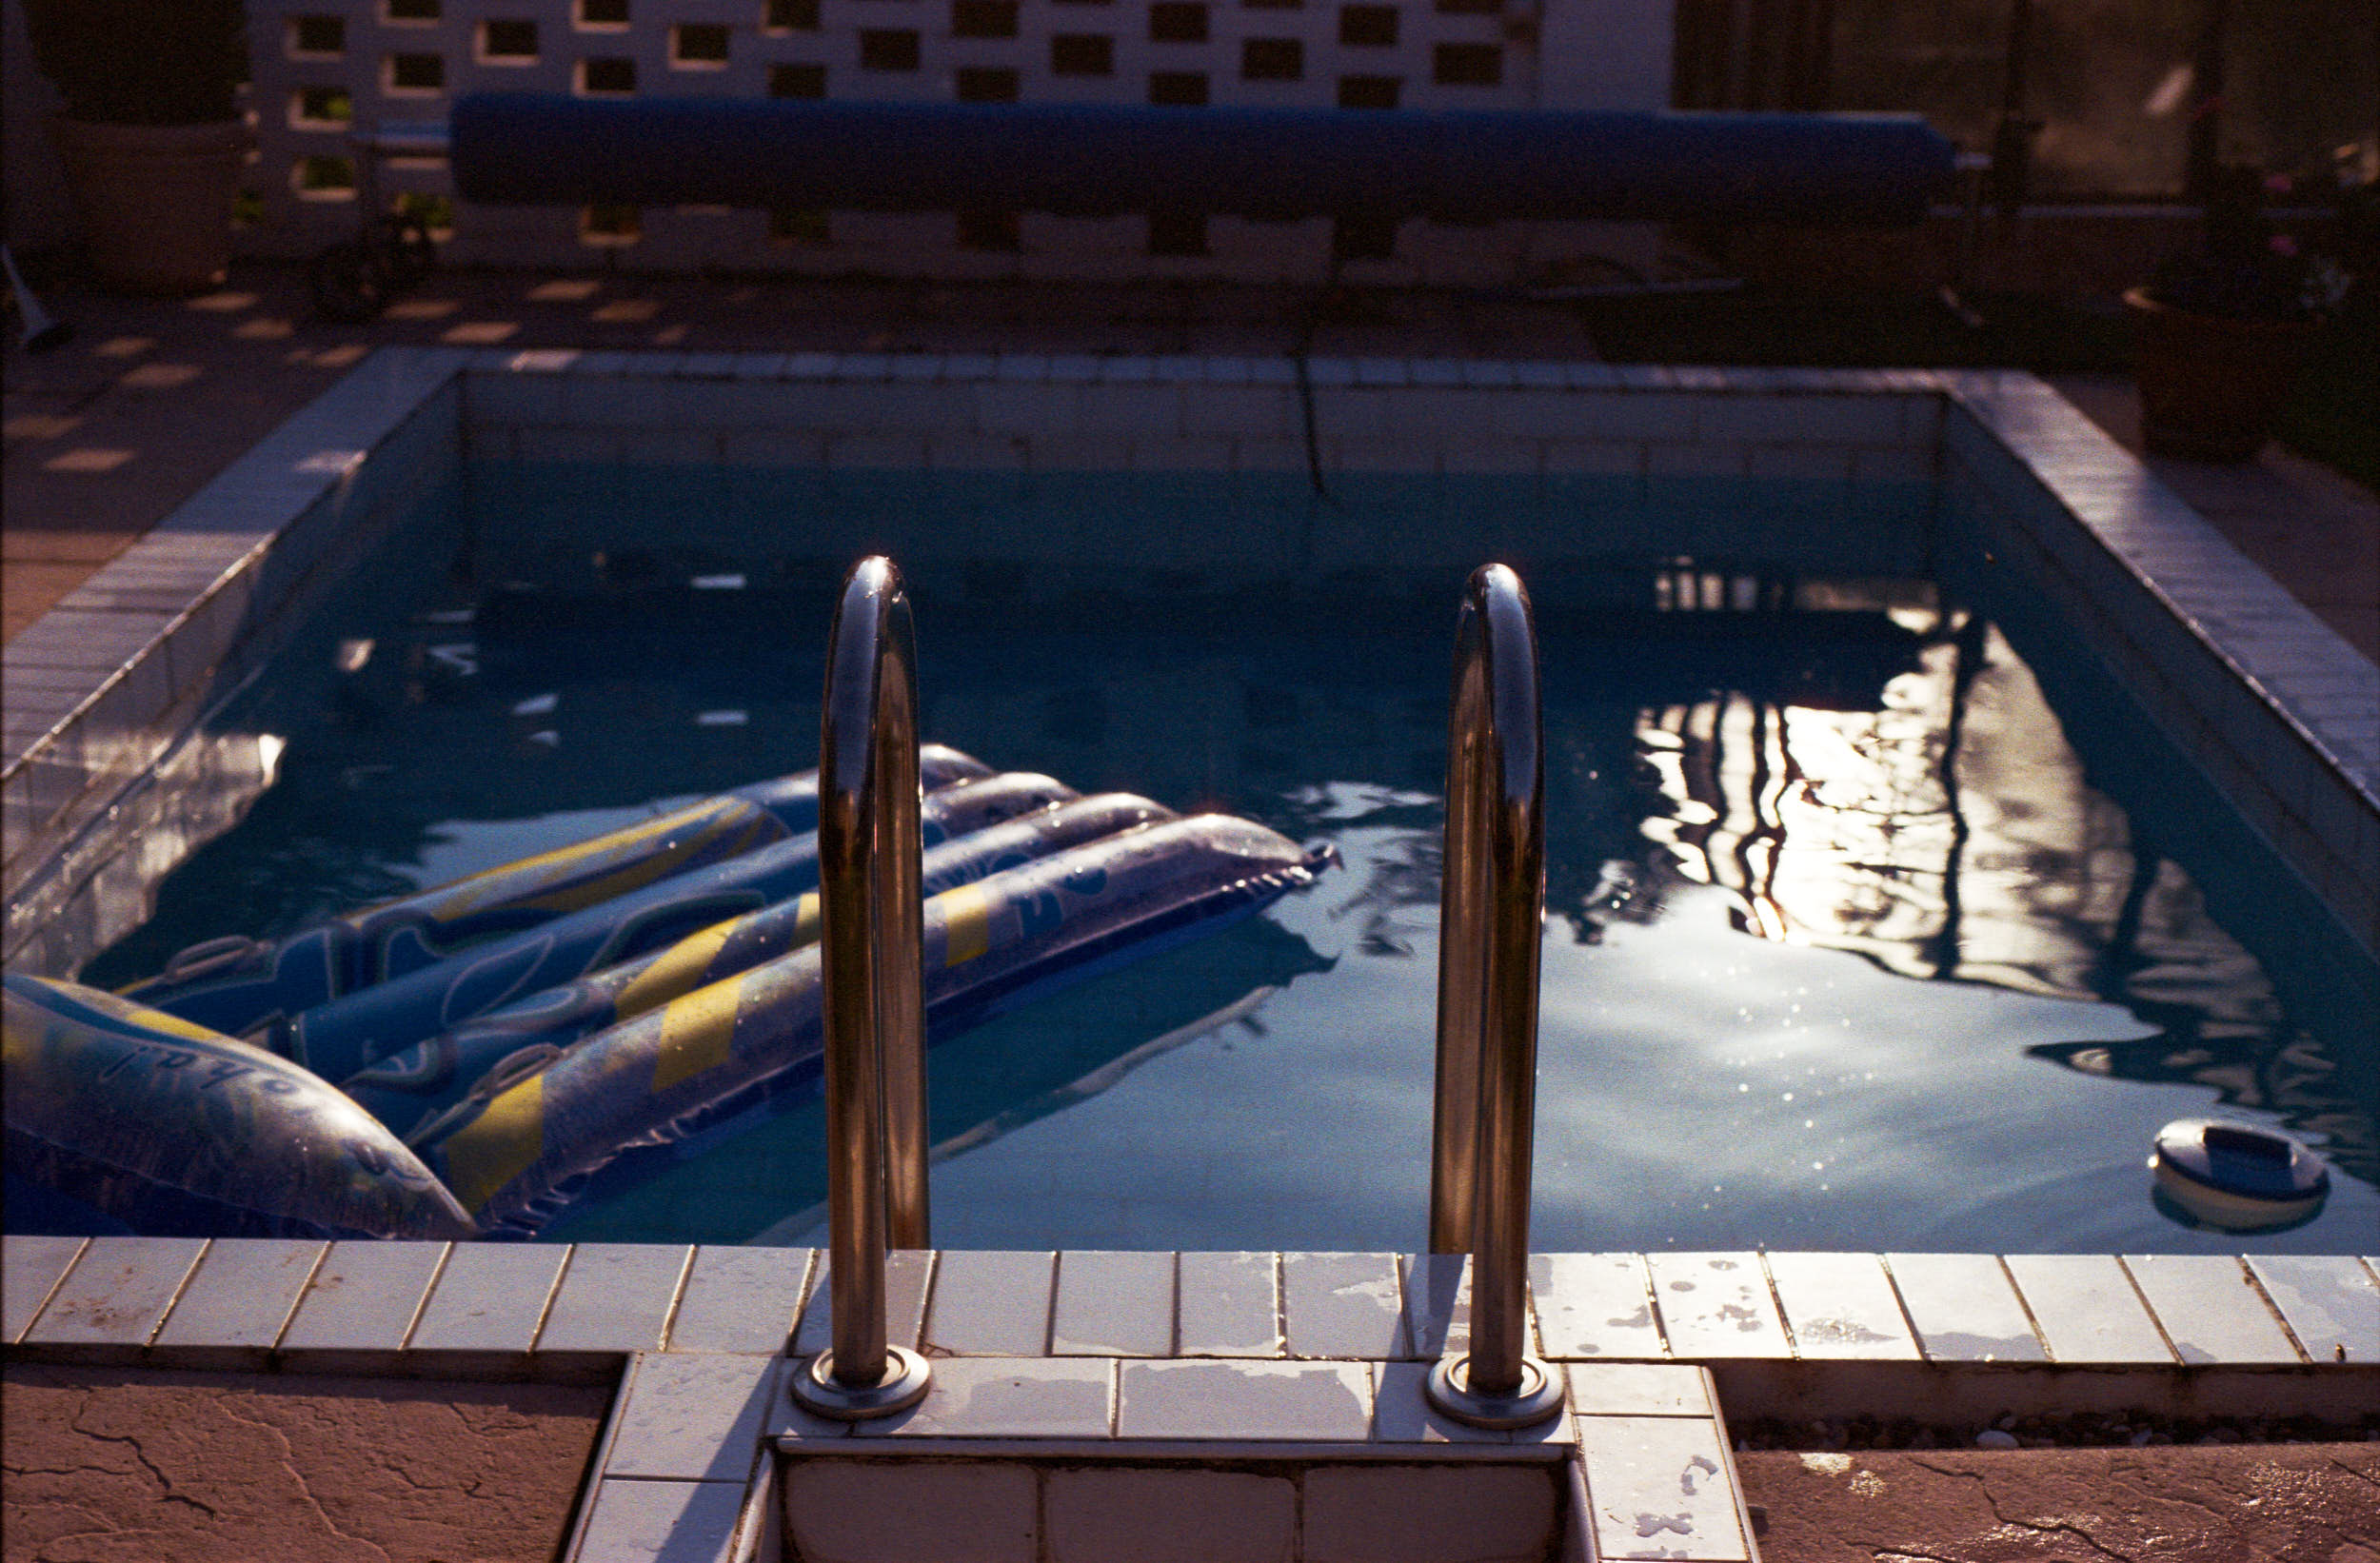 Summer vibes. Swimming pool in the evening light.